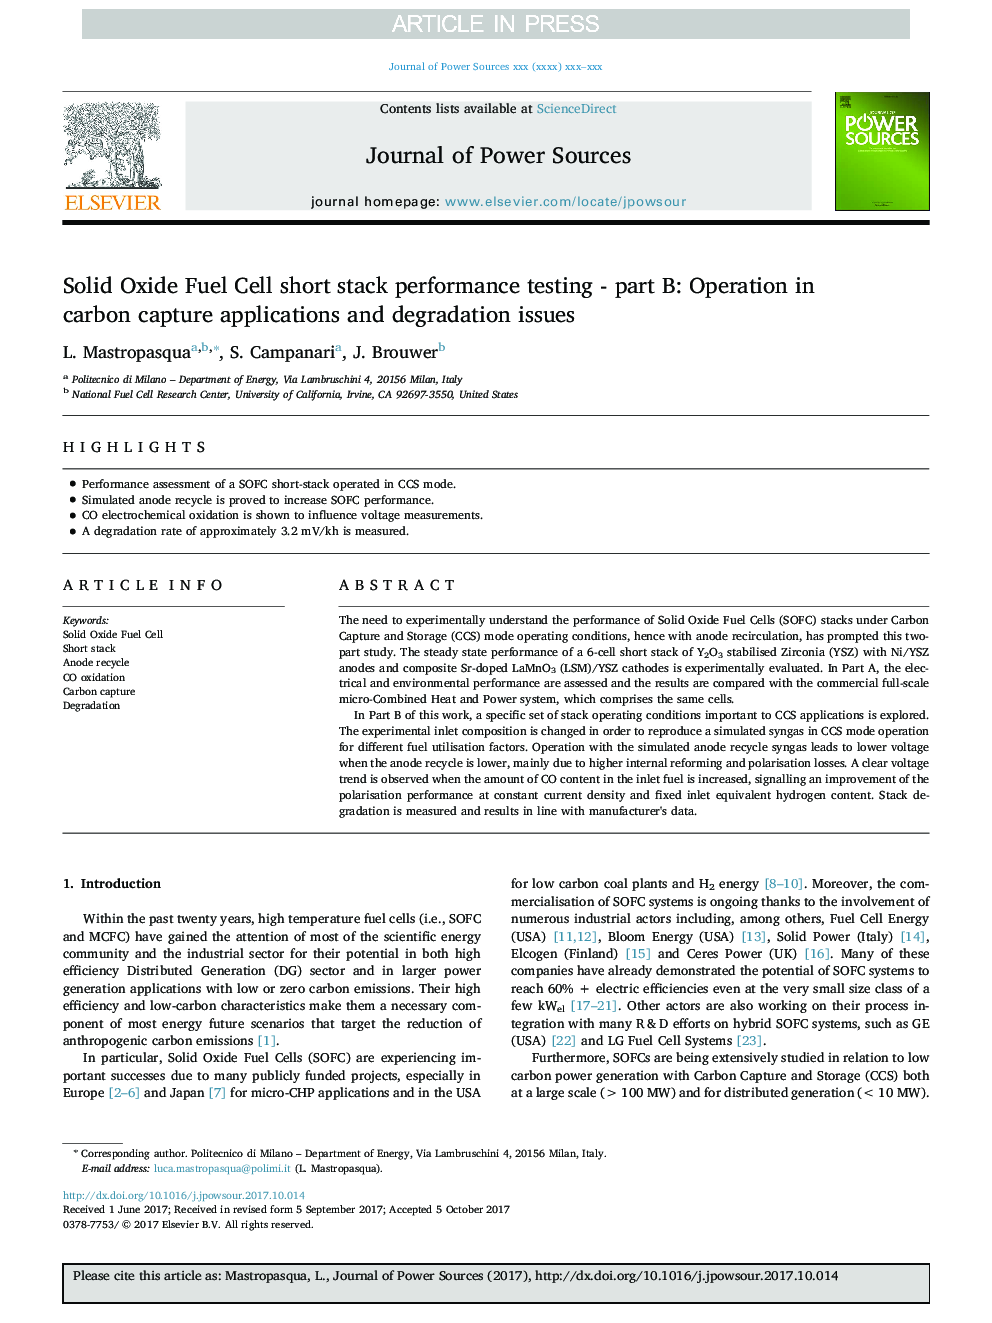 Solid Oxide Fuel Cell short stack performance testing - part B: Operation in carbon capture applications and degradation issues